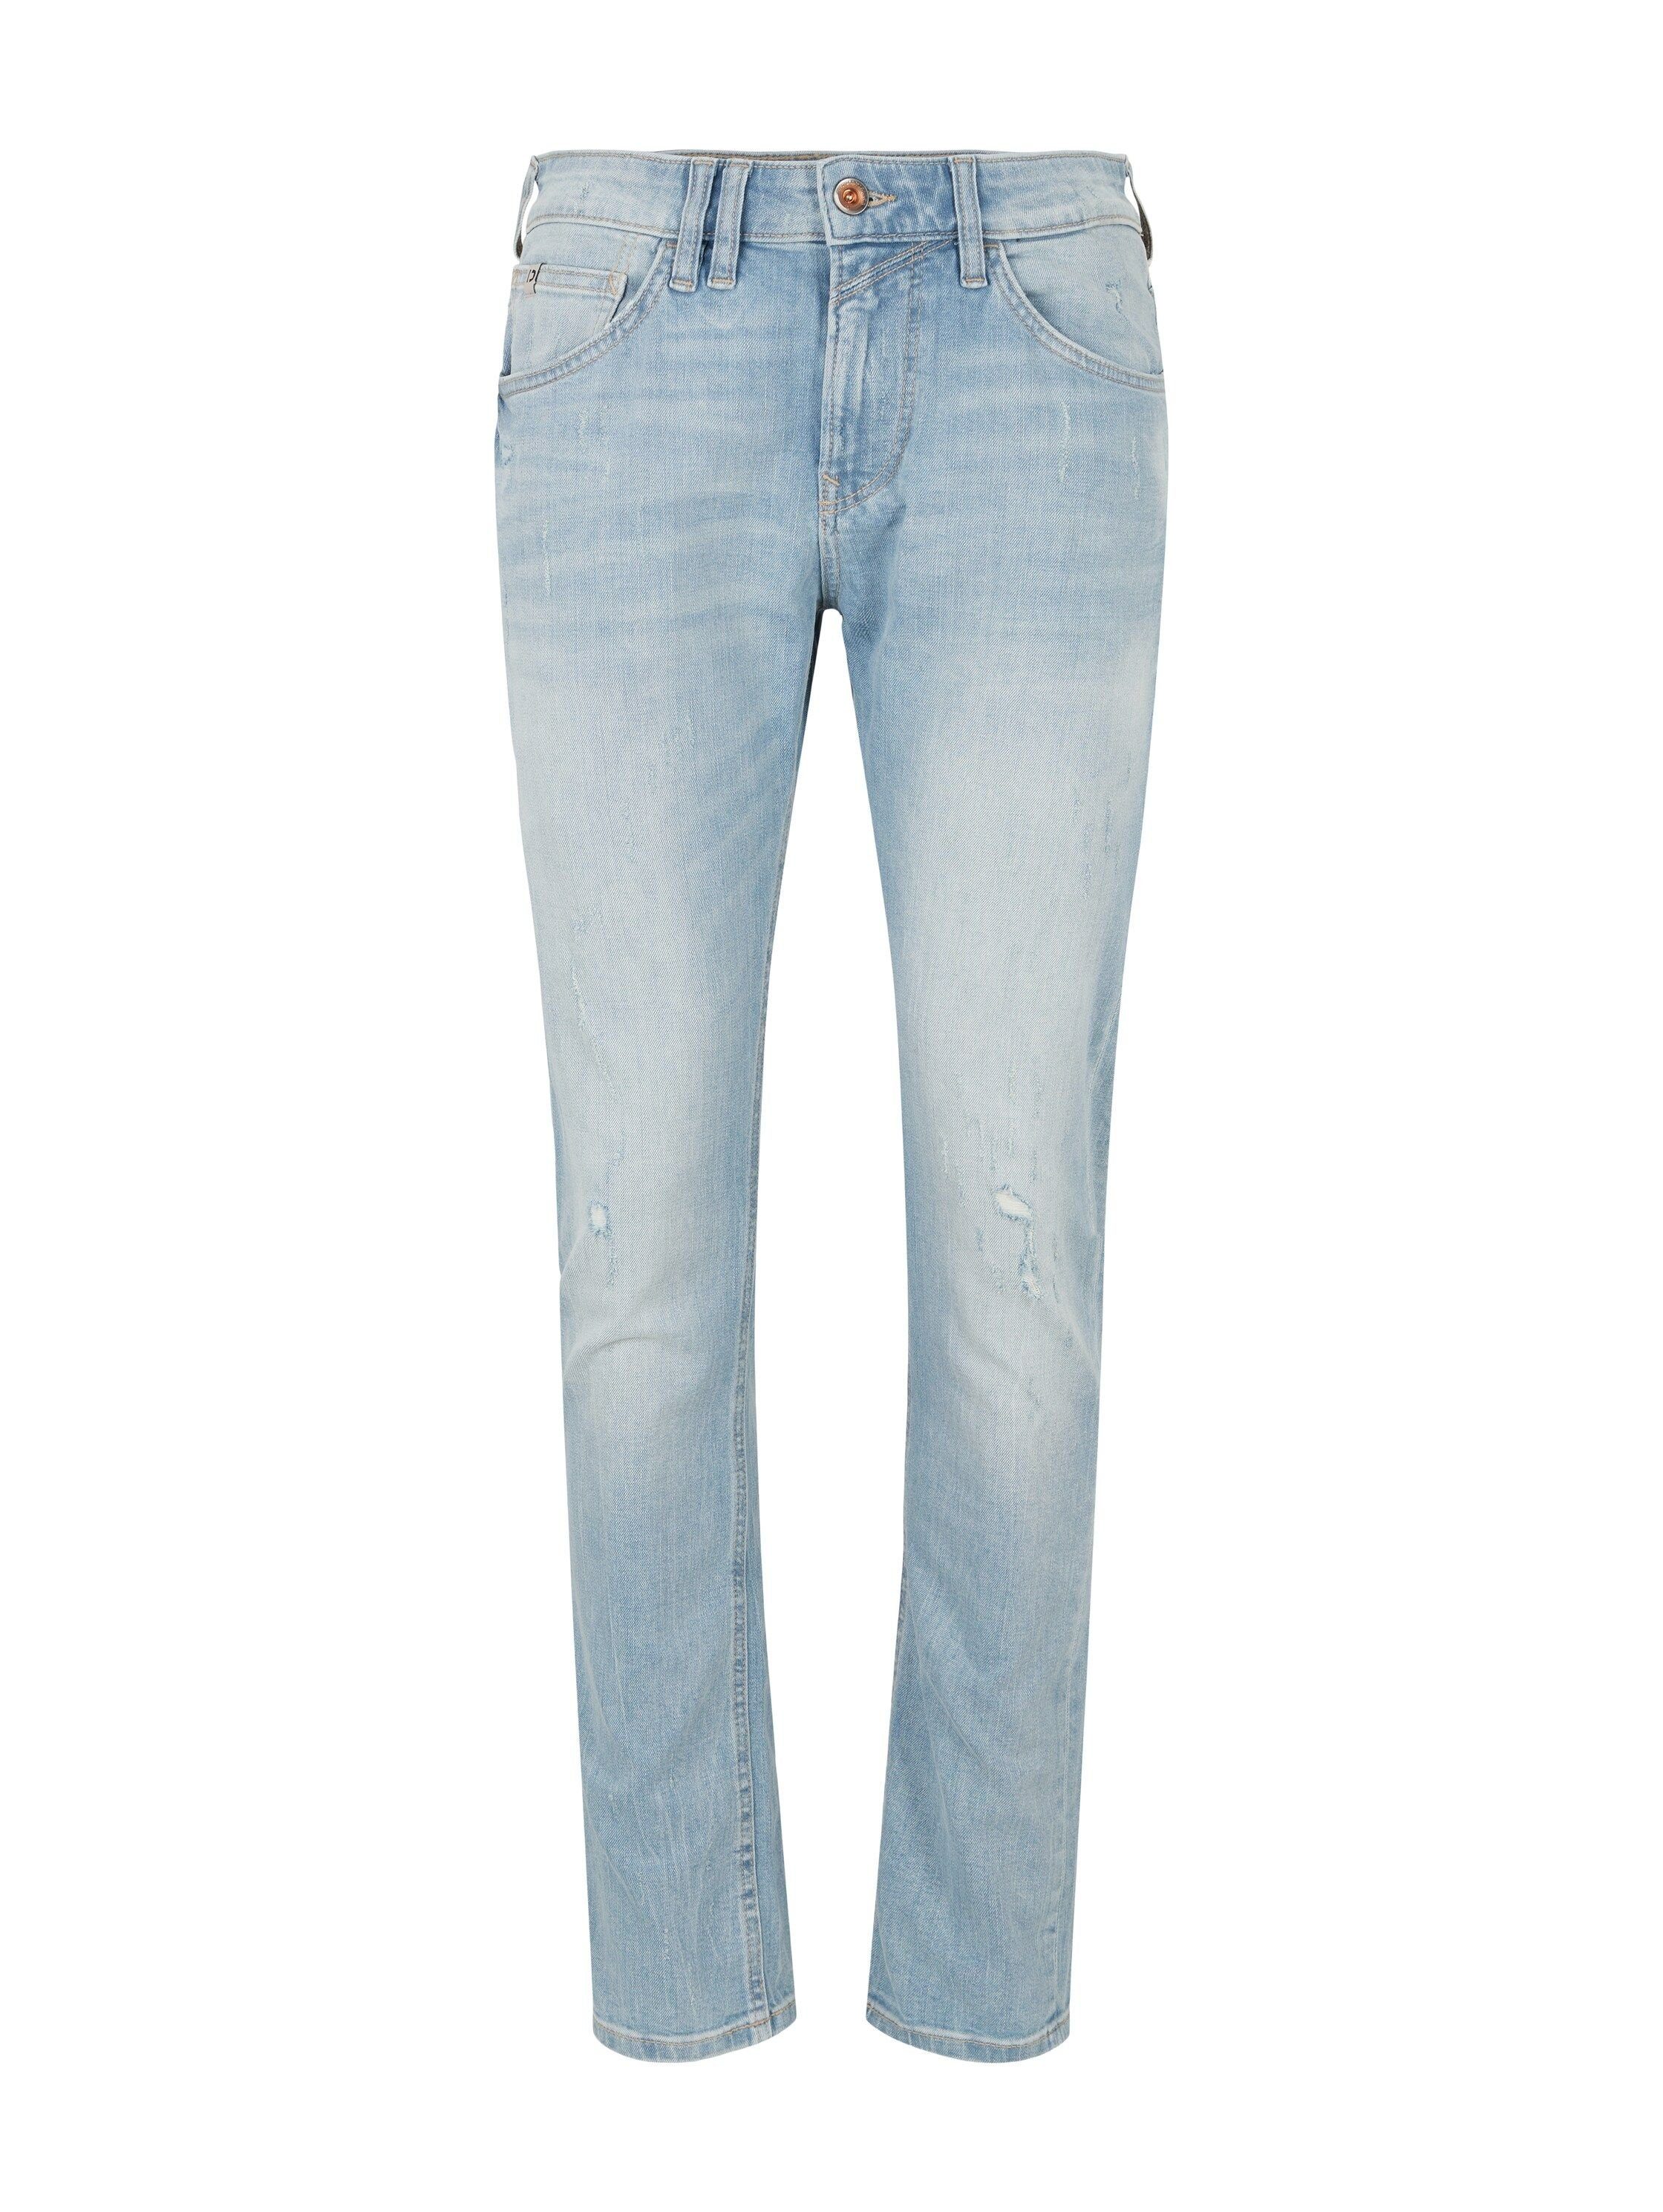 TOM TAILOR Denim Straight-Jeans | Straight-Fit Jeans